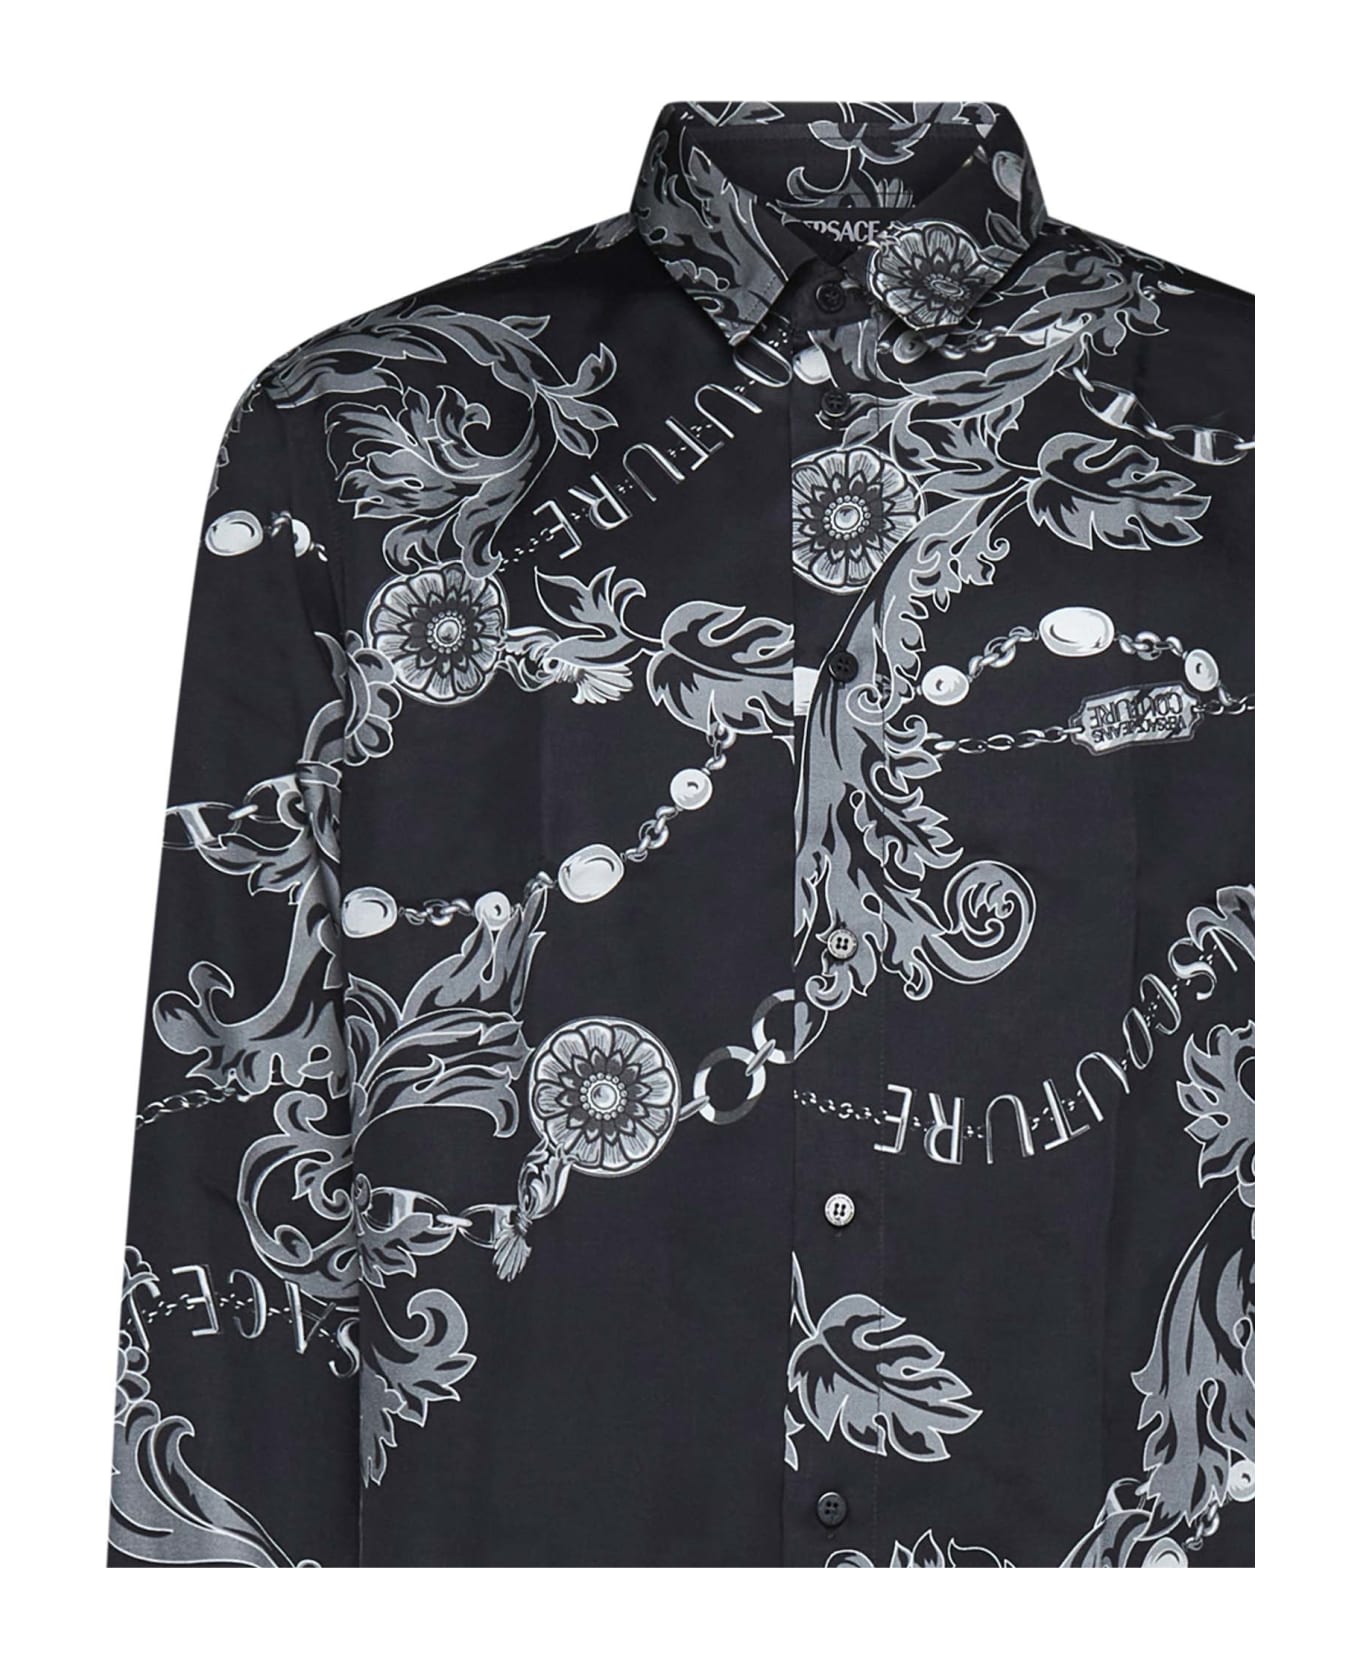 Versace Jeans Couture Chain Couture Print Shirt - Black シャツ